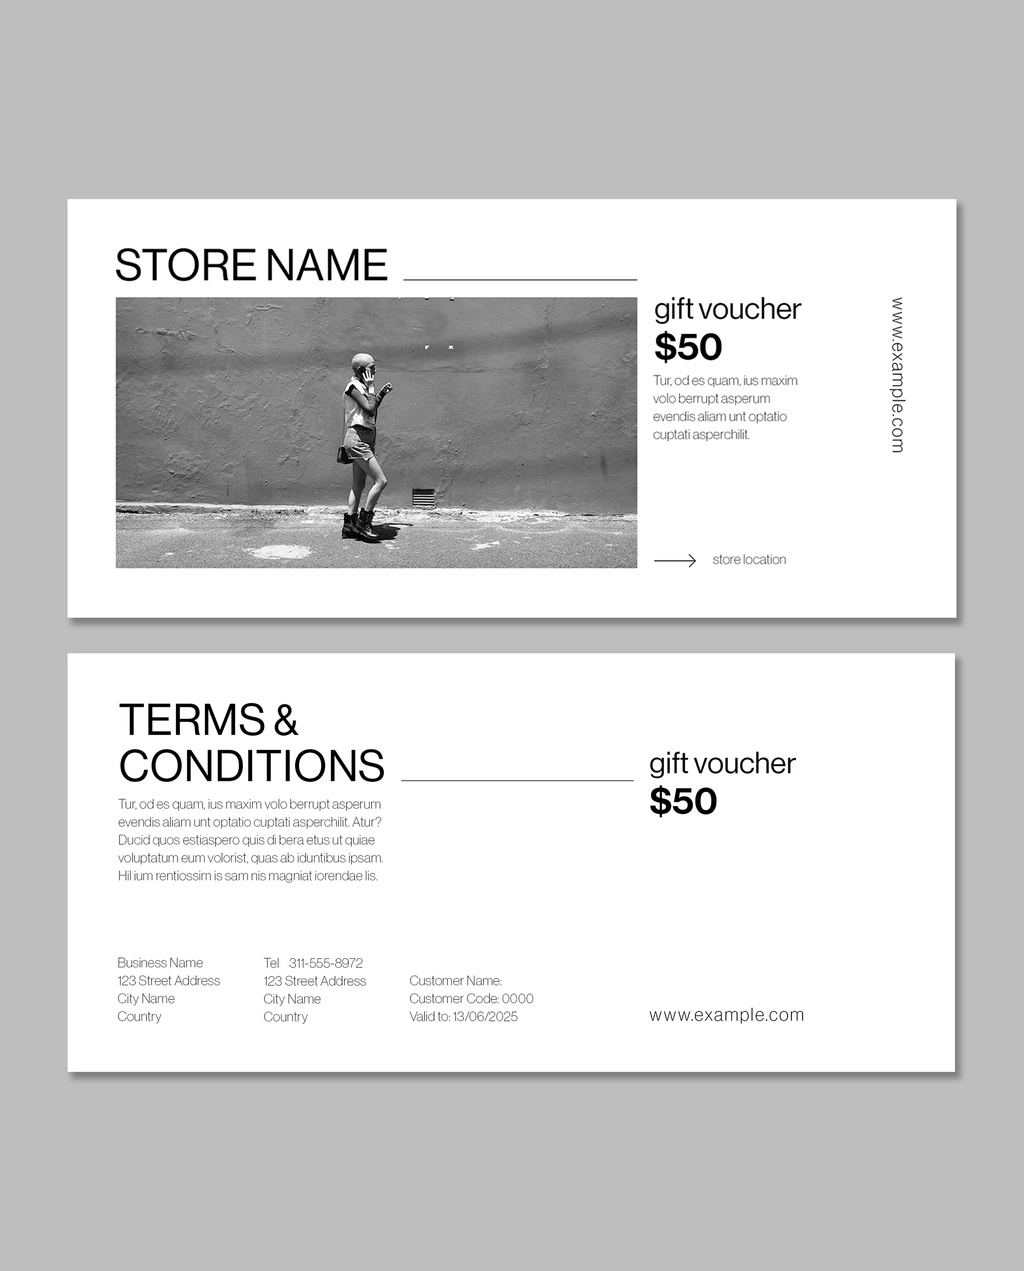 minimal-black-and-white-gift-voucher-layout-indd